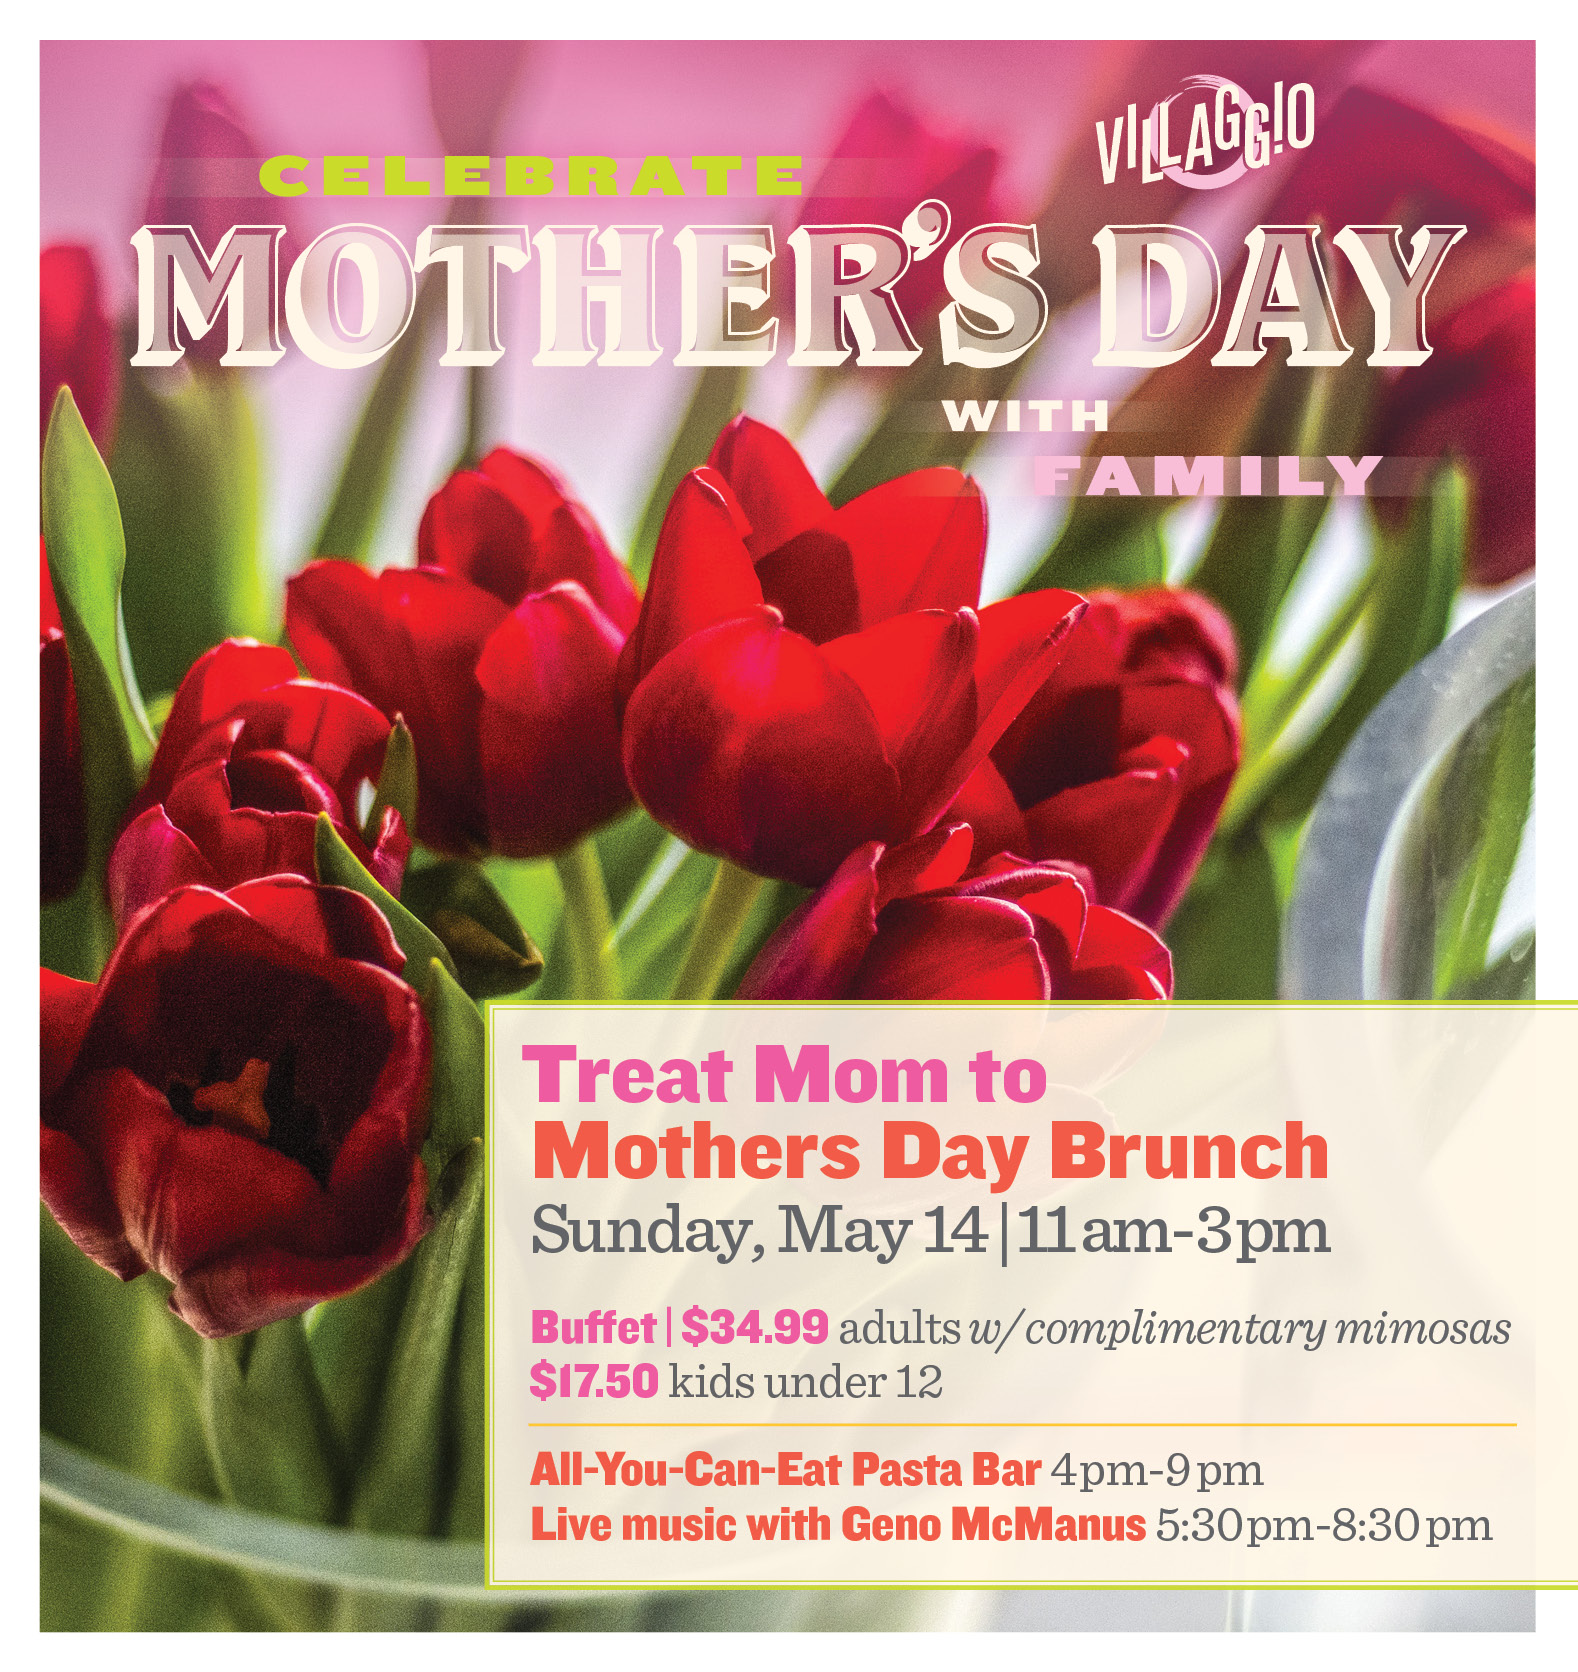 Celebrate Mother's Day with Family | Treat Mom to Mother's Day Brunch